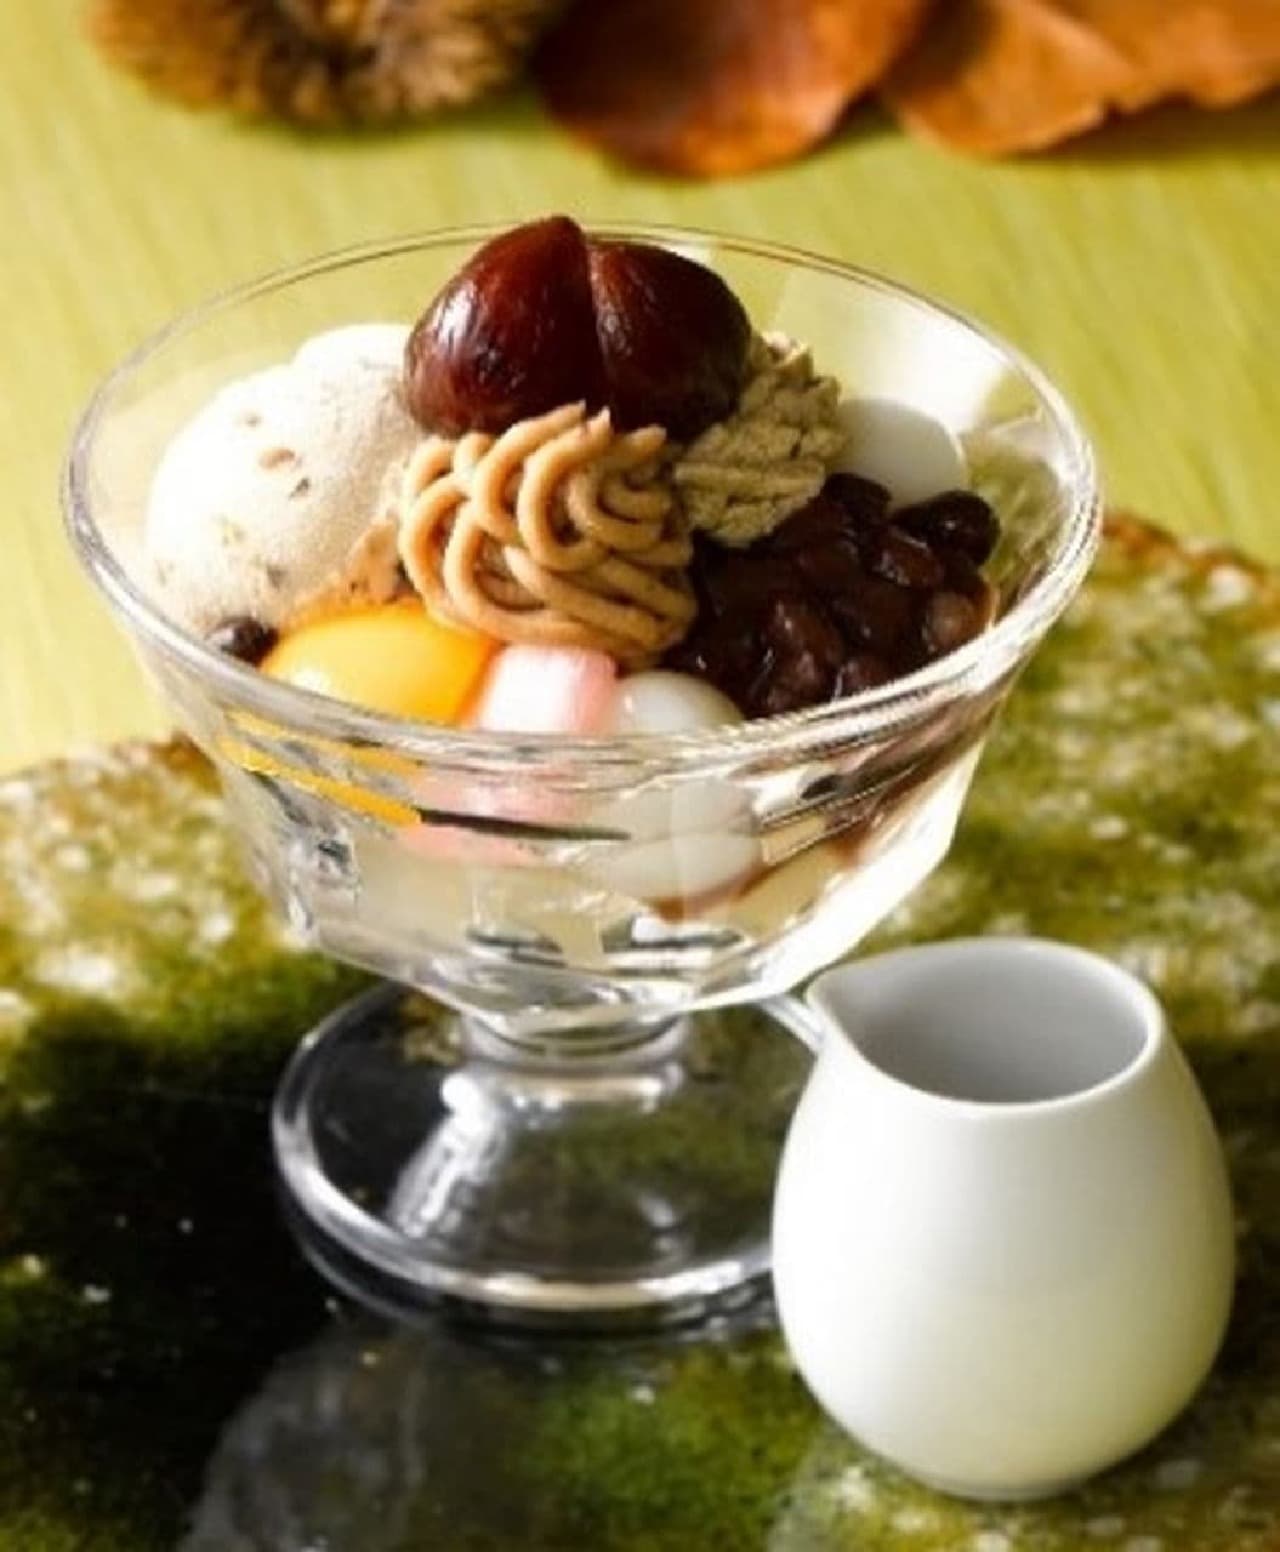 "Astringent chestnut and roasted green tea" parfait and Sunday at Royal Host